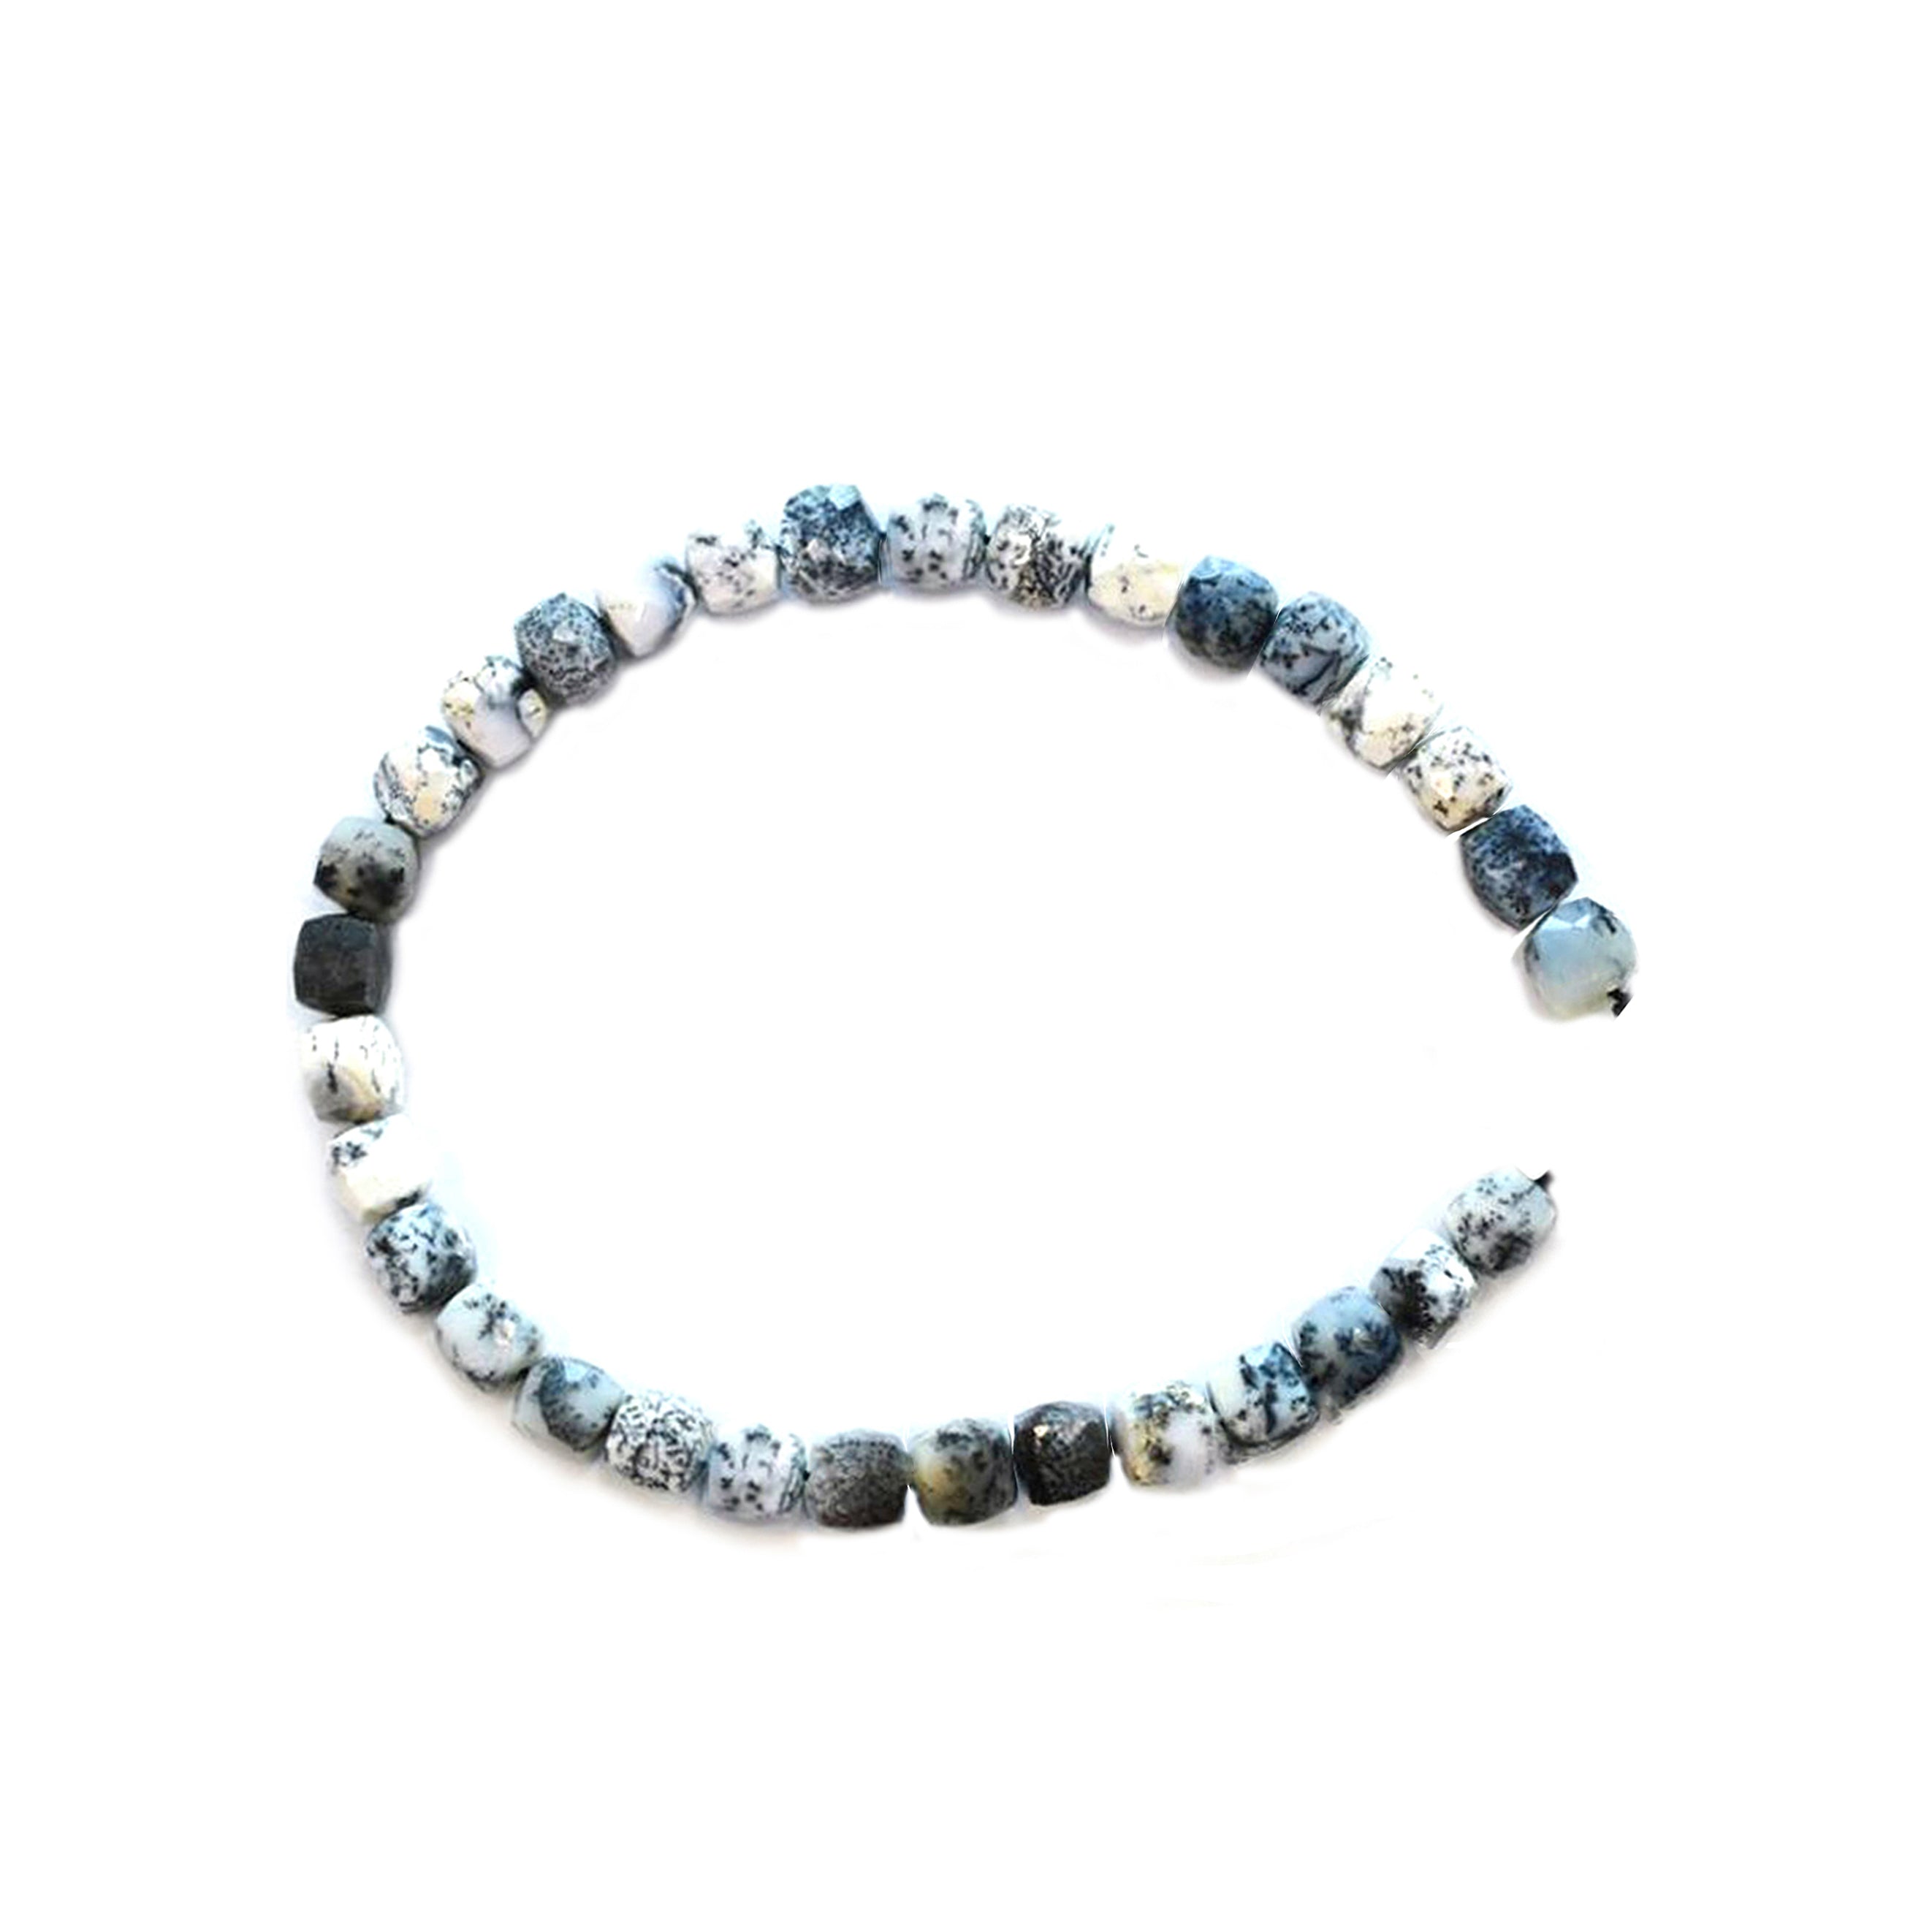 Dendritic Opal 6 To 7 MM Faceted Cube Shape Beads Strand